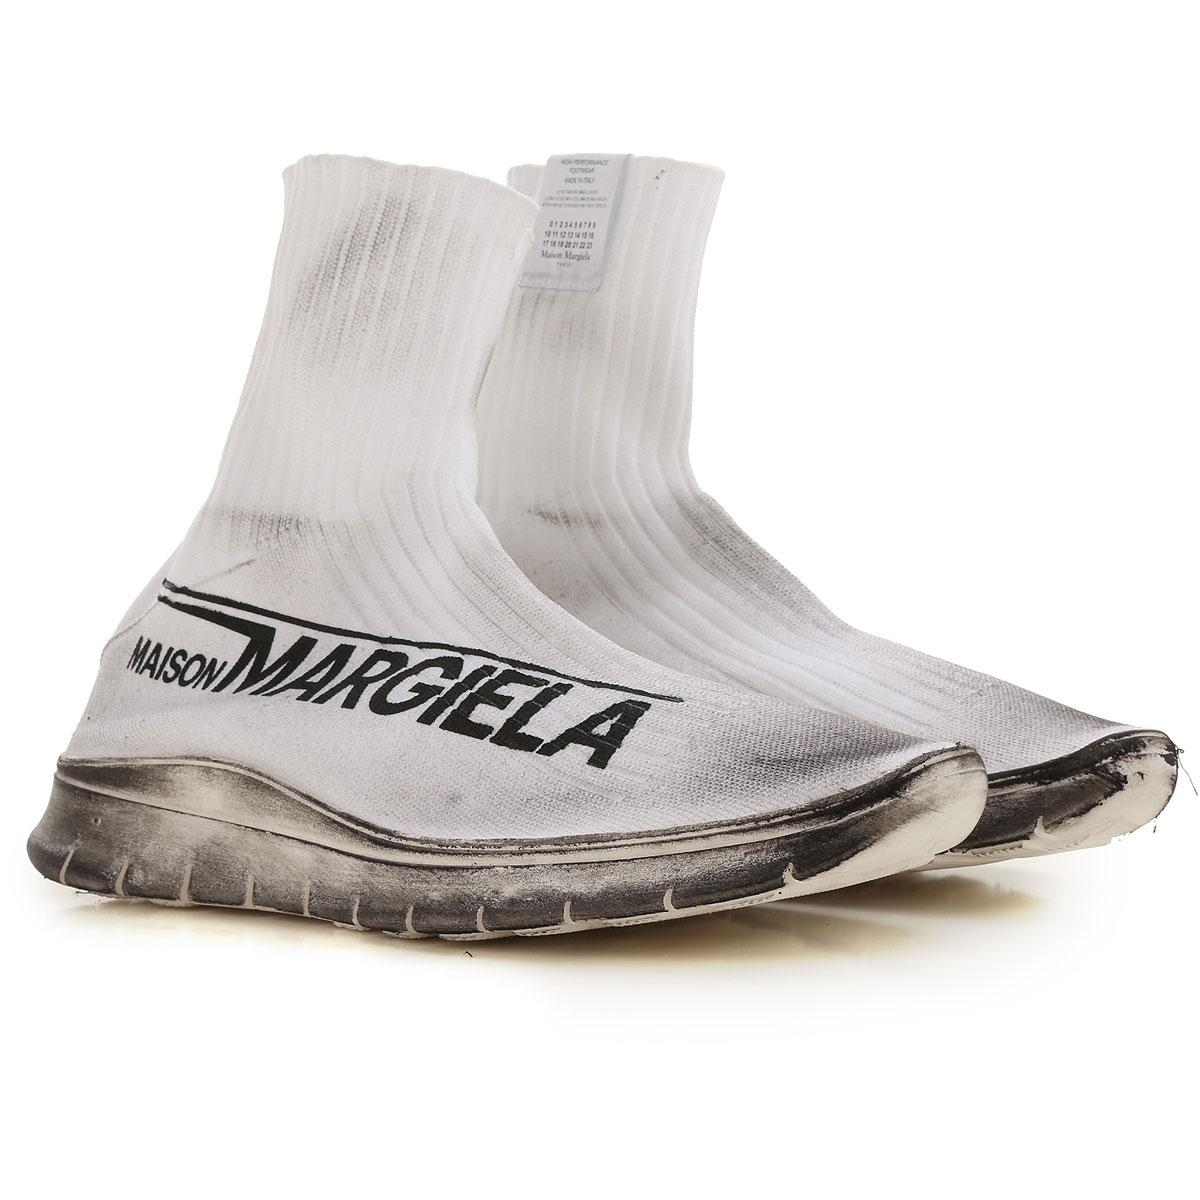 Maison Margiela Synthetic Sneakers For Men On Sale in Dirty White ...